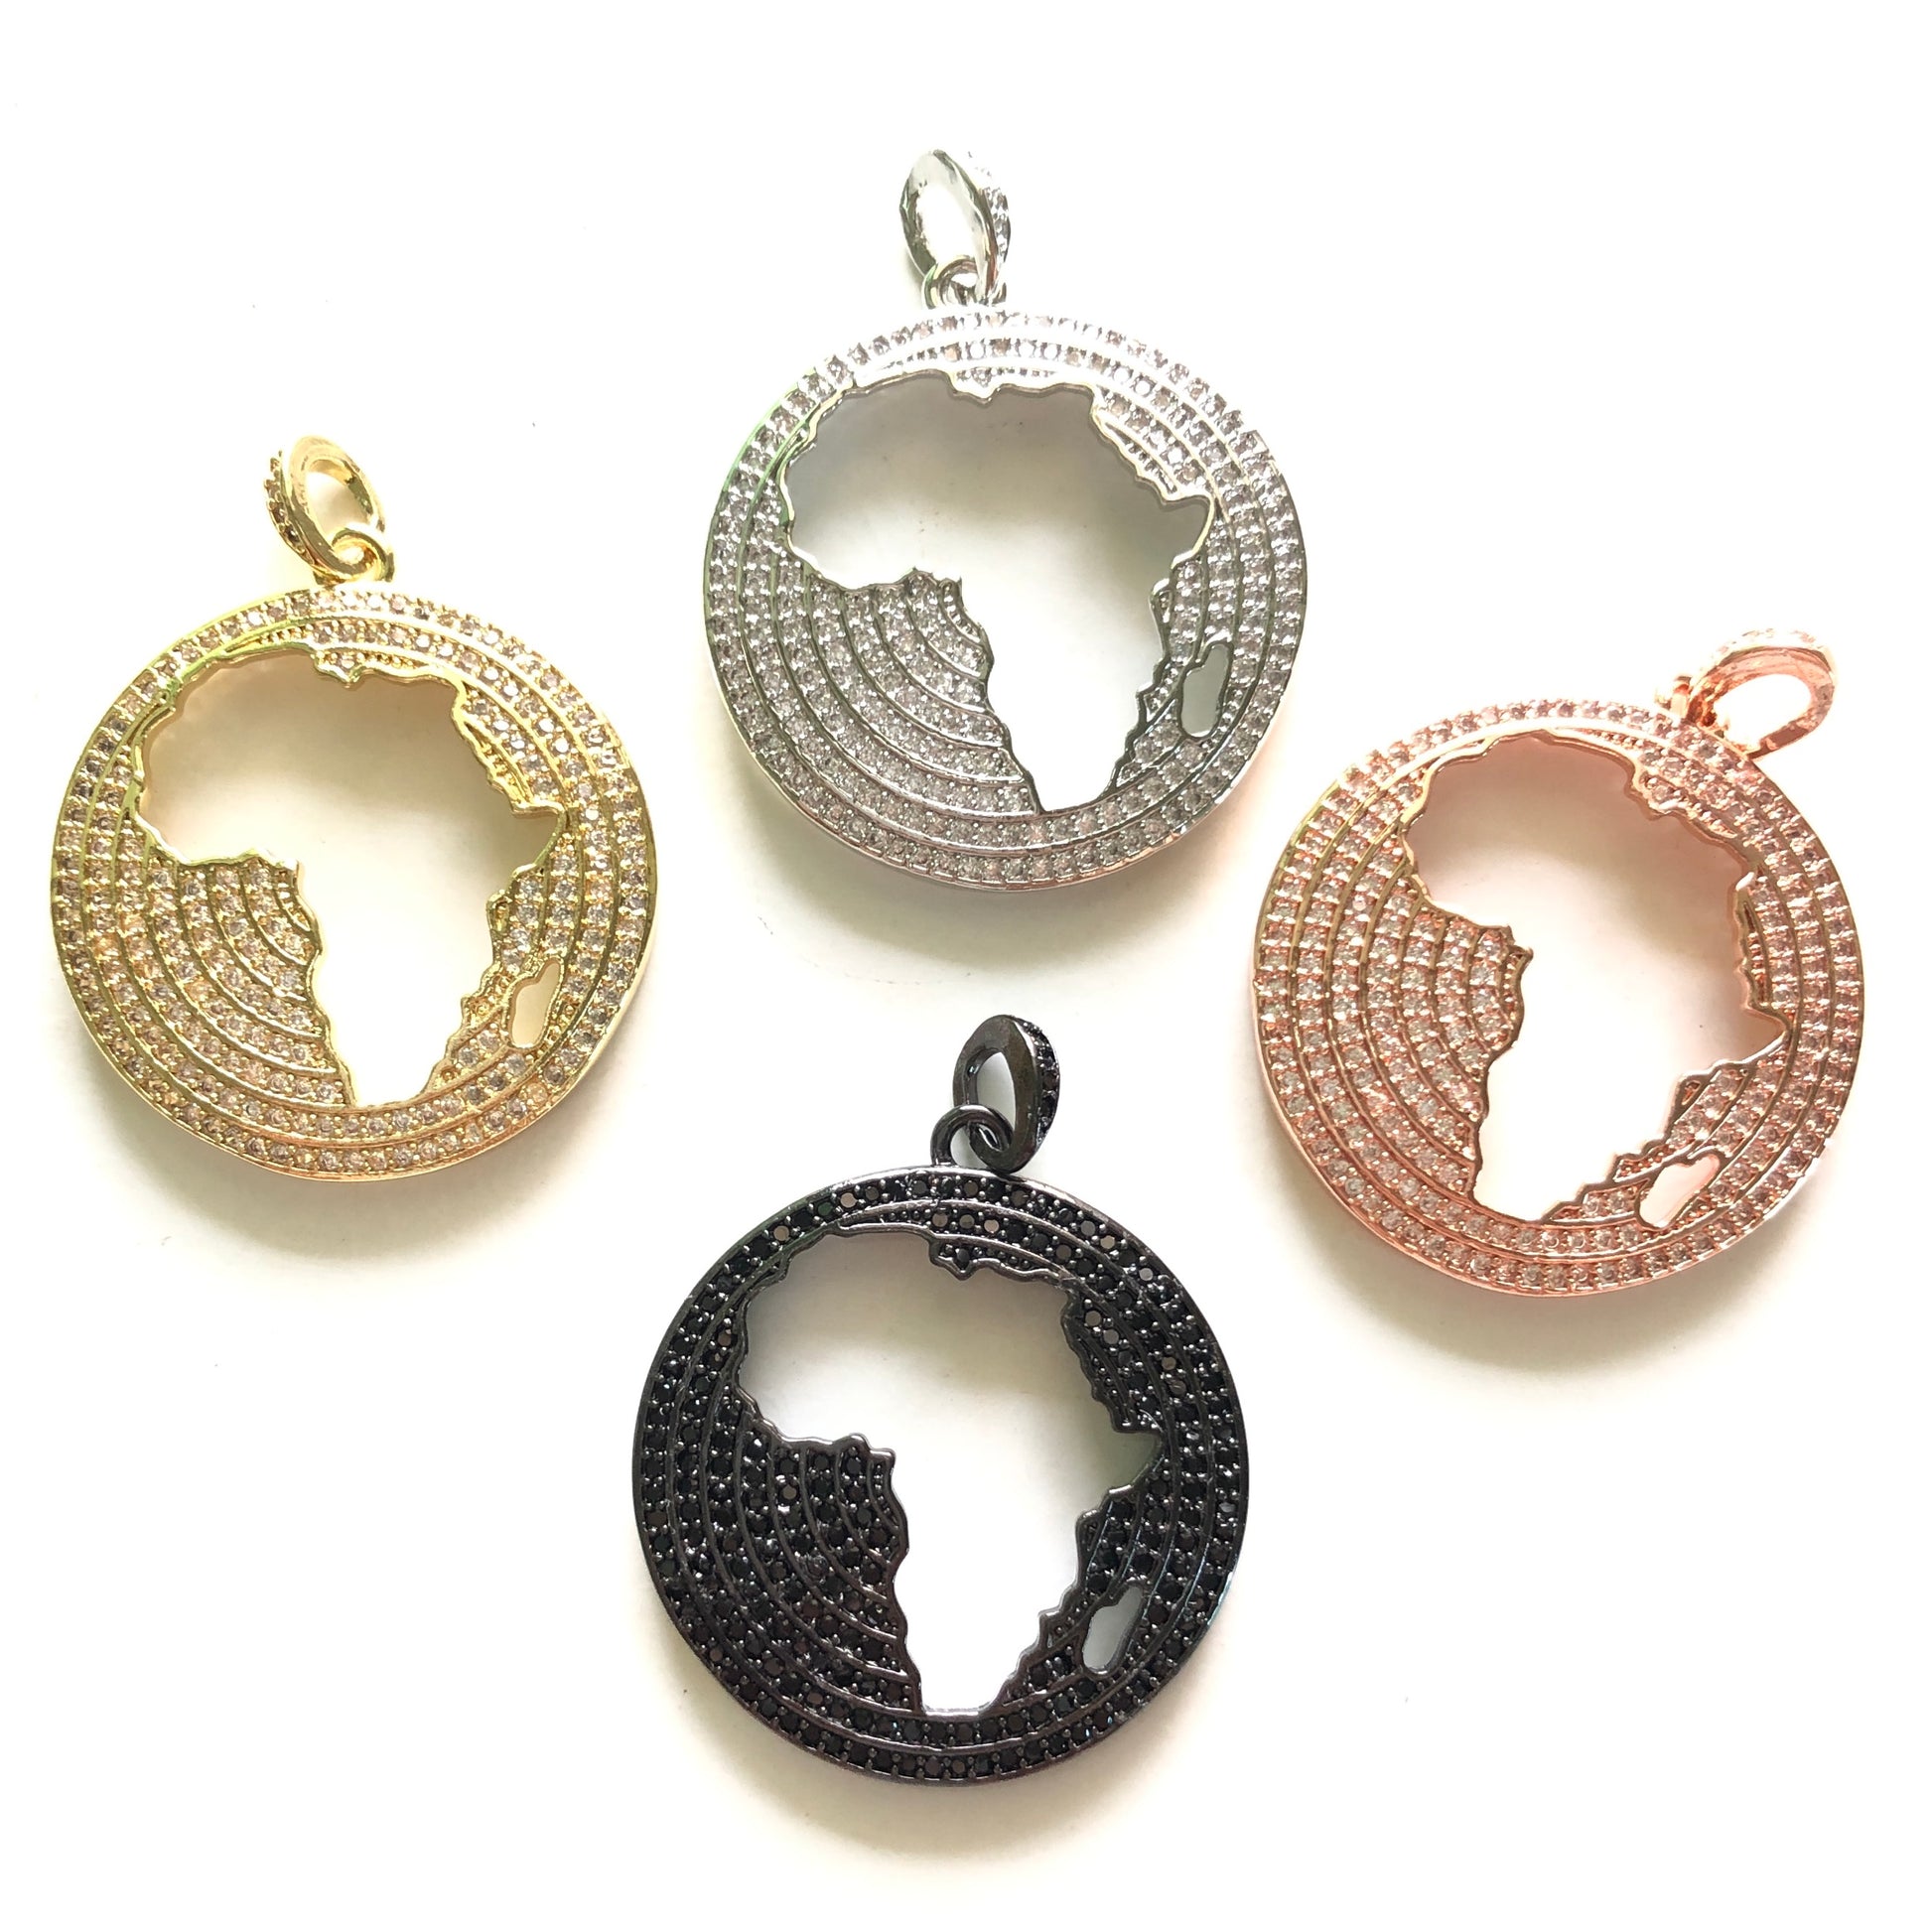 10pcs/lot 27mm CZ Paved Africa Map Charms for Black History Month Juneteenth Awareness CZ Paved Charms Juneteenth & Black History Month Awareness Maps On Sale Charms Beads Beyond